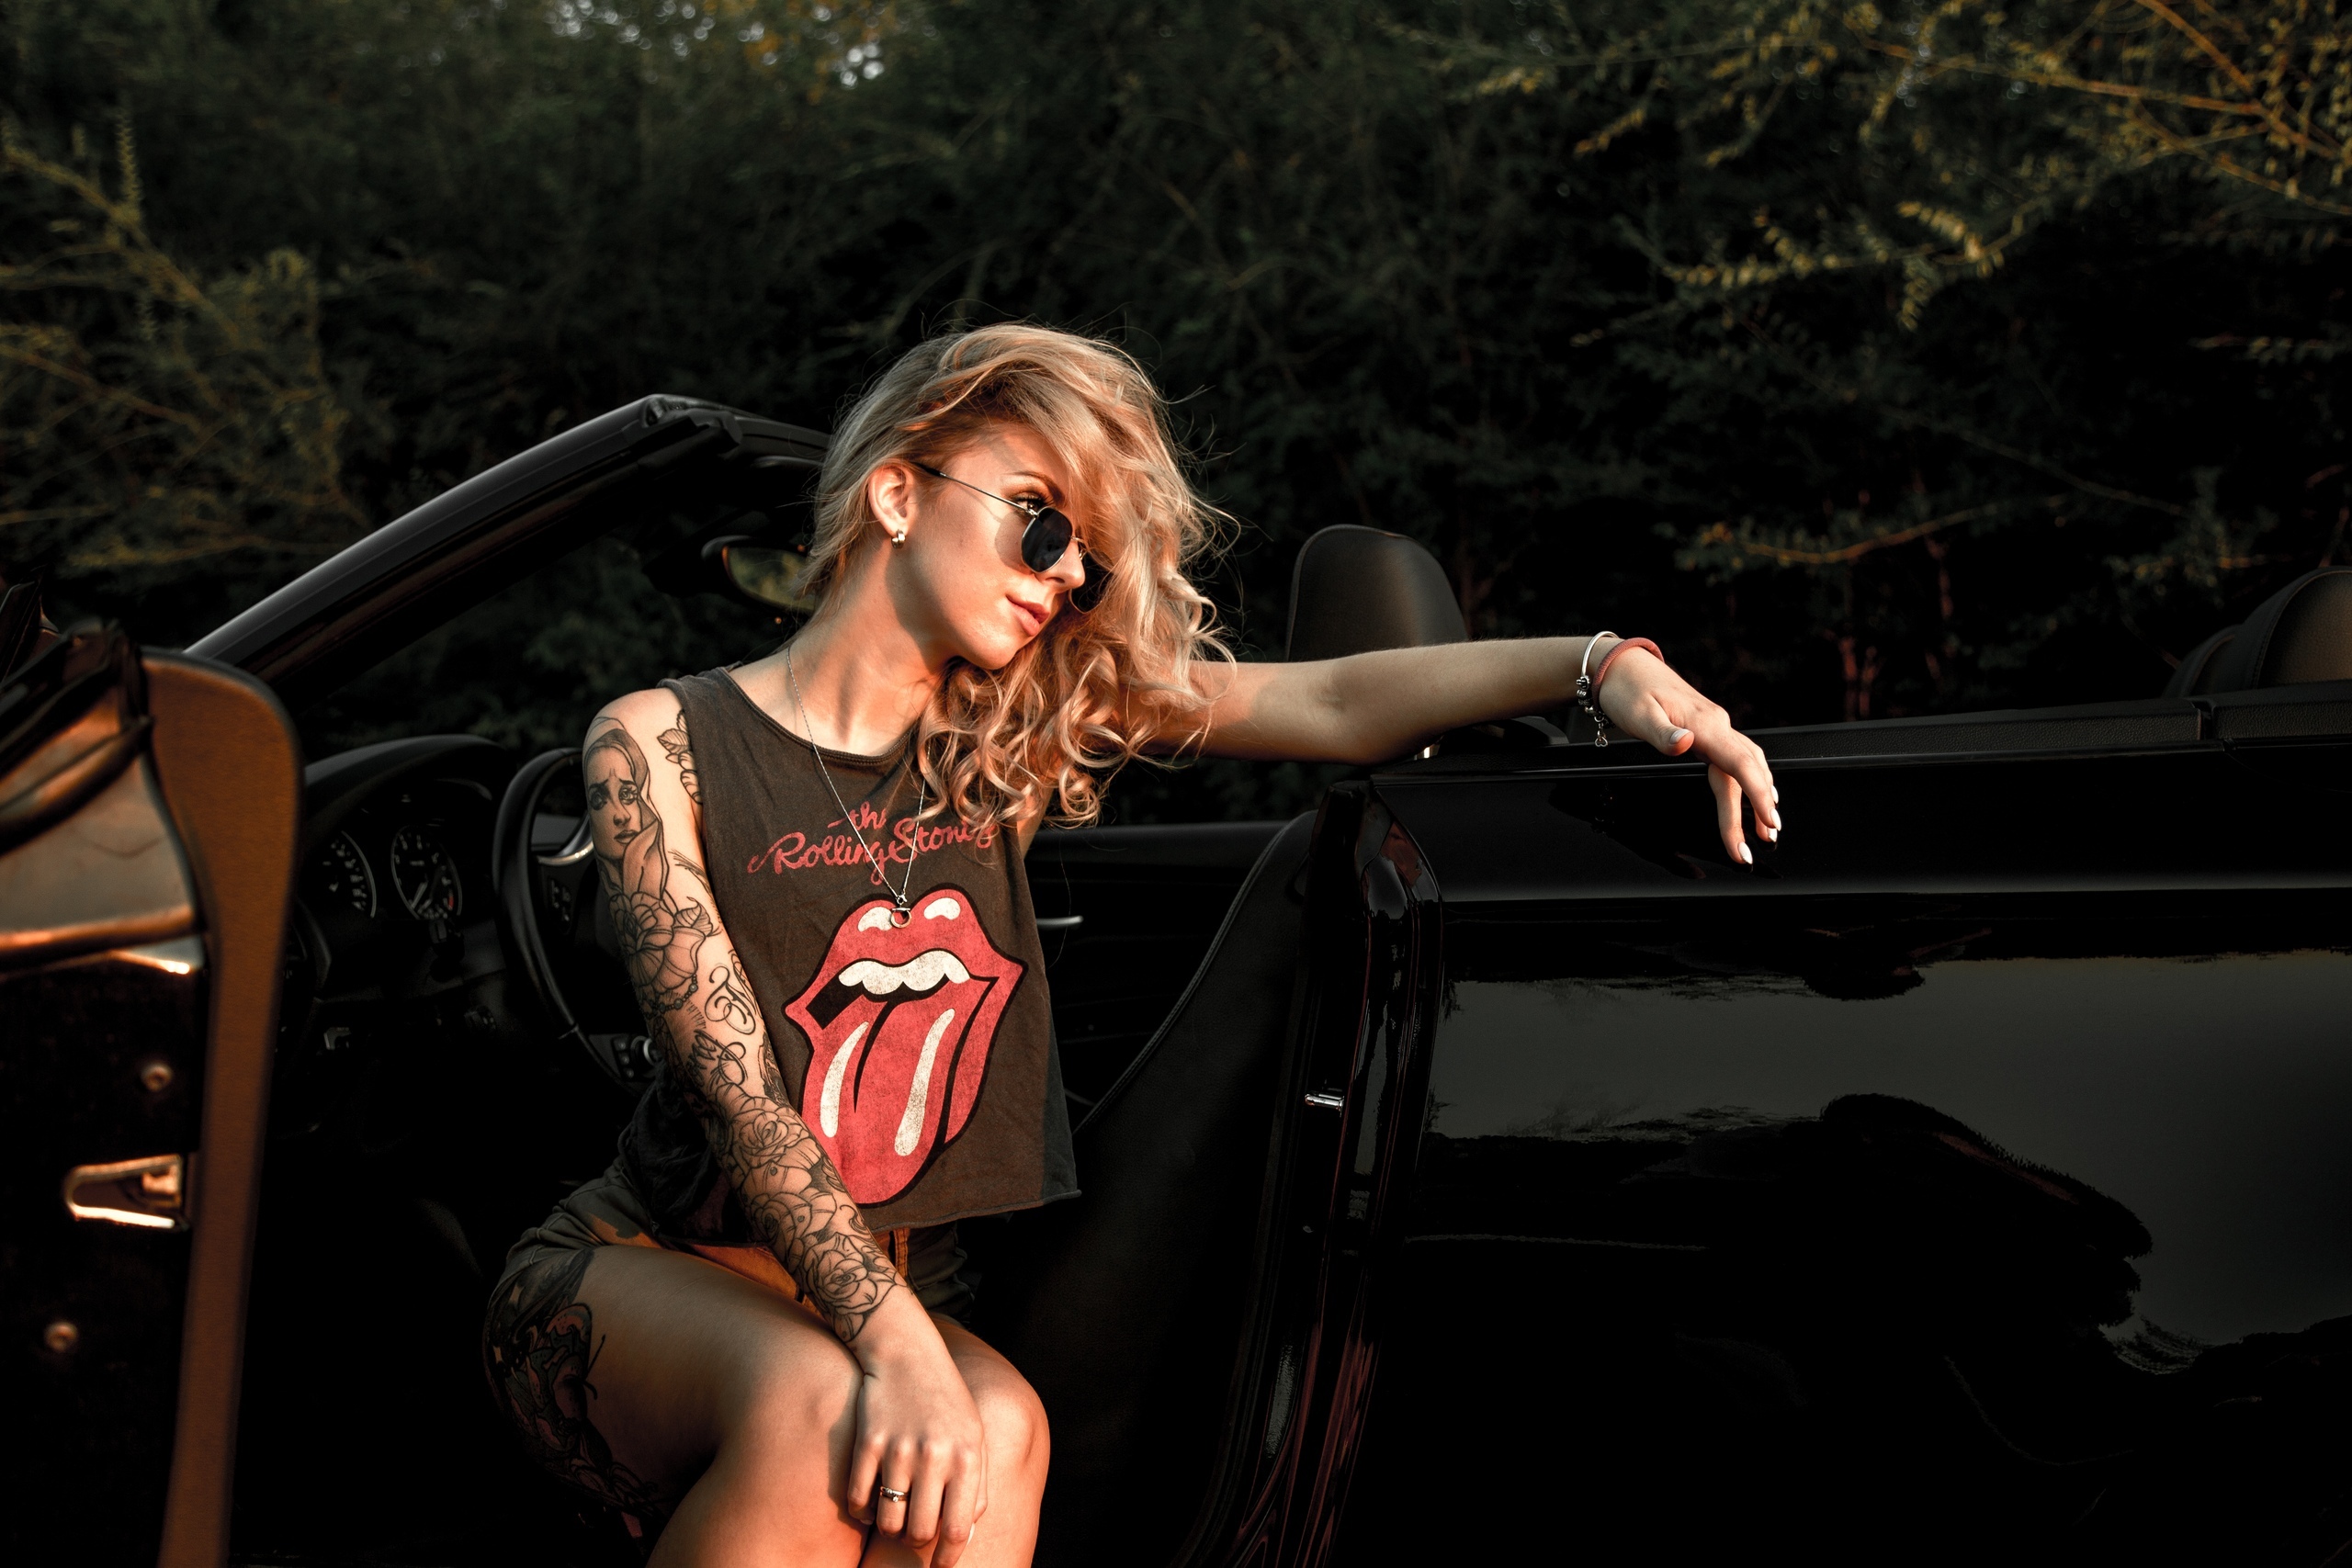 Women Model Blonde Women Outdoors T Shirt Women With Glasses Women With Cars Tattoo Glasses Trees Ro 2560x1707